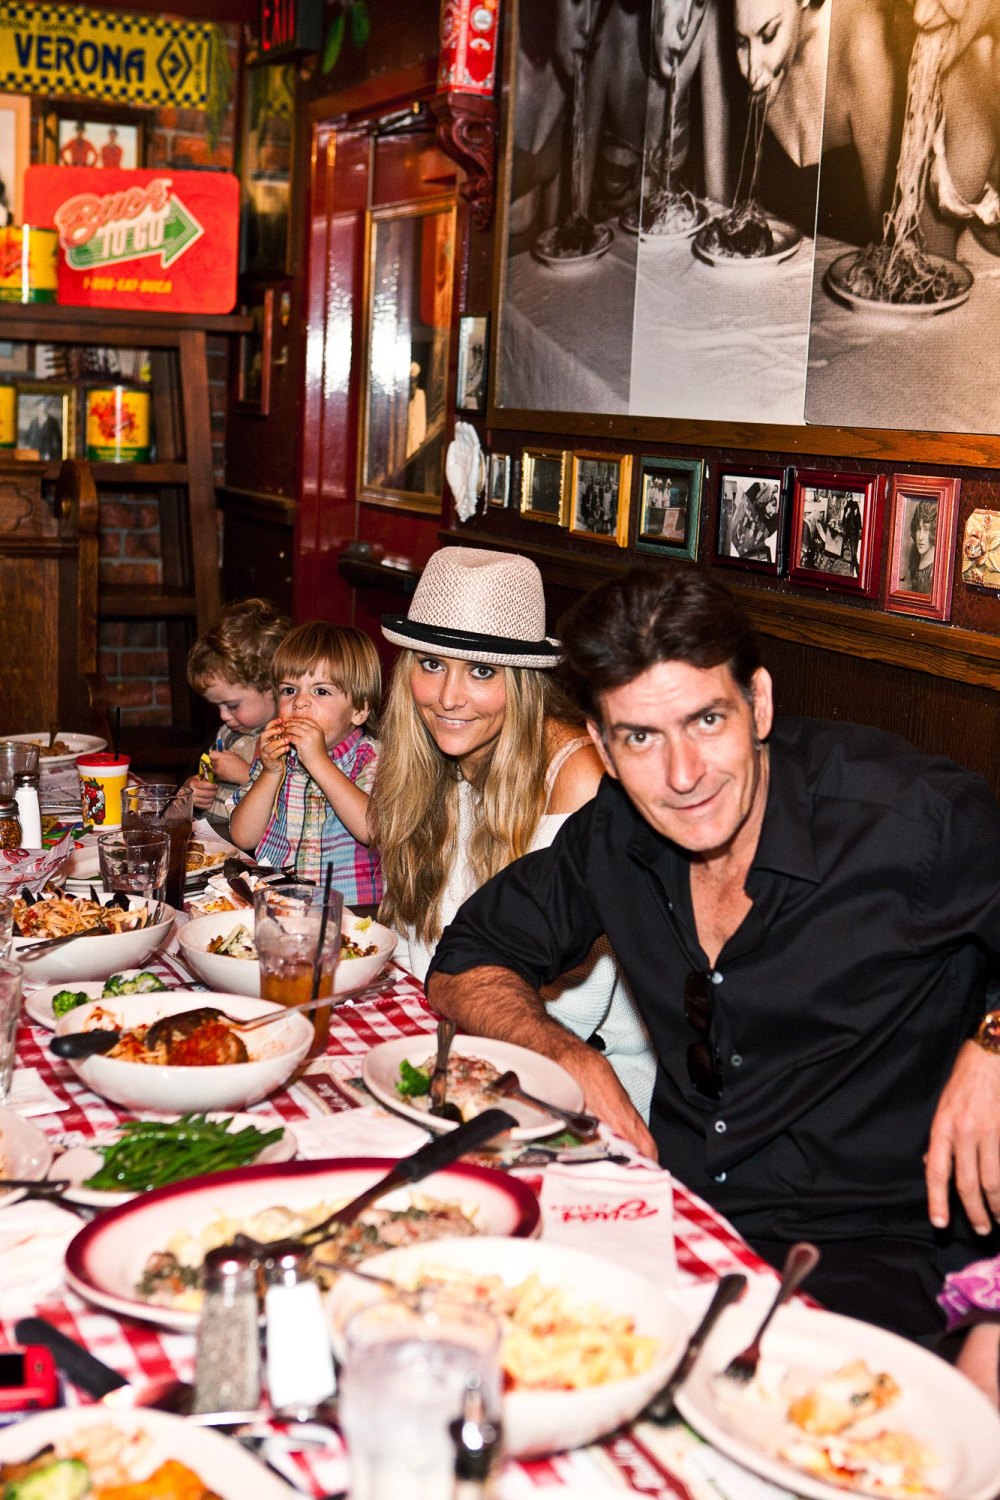 Charlie Sheen Says His Ex Wife Brooke Mueller Is Not in the Picture With Their Twin Boys 119